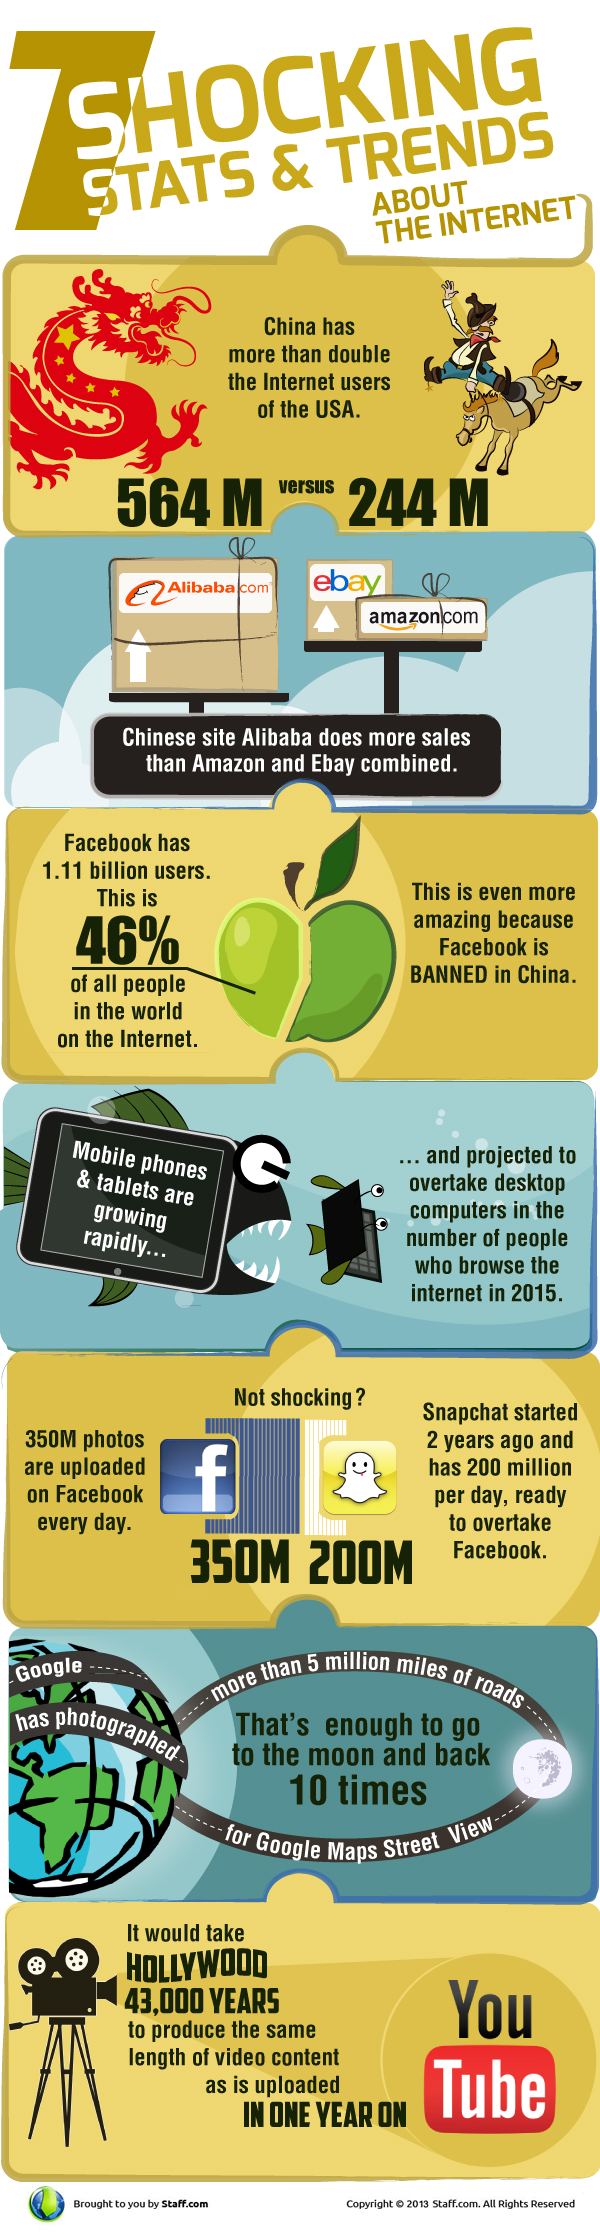 7 Shocking Stats & Trends About the Internet Infographic | Staff.com